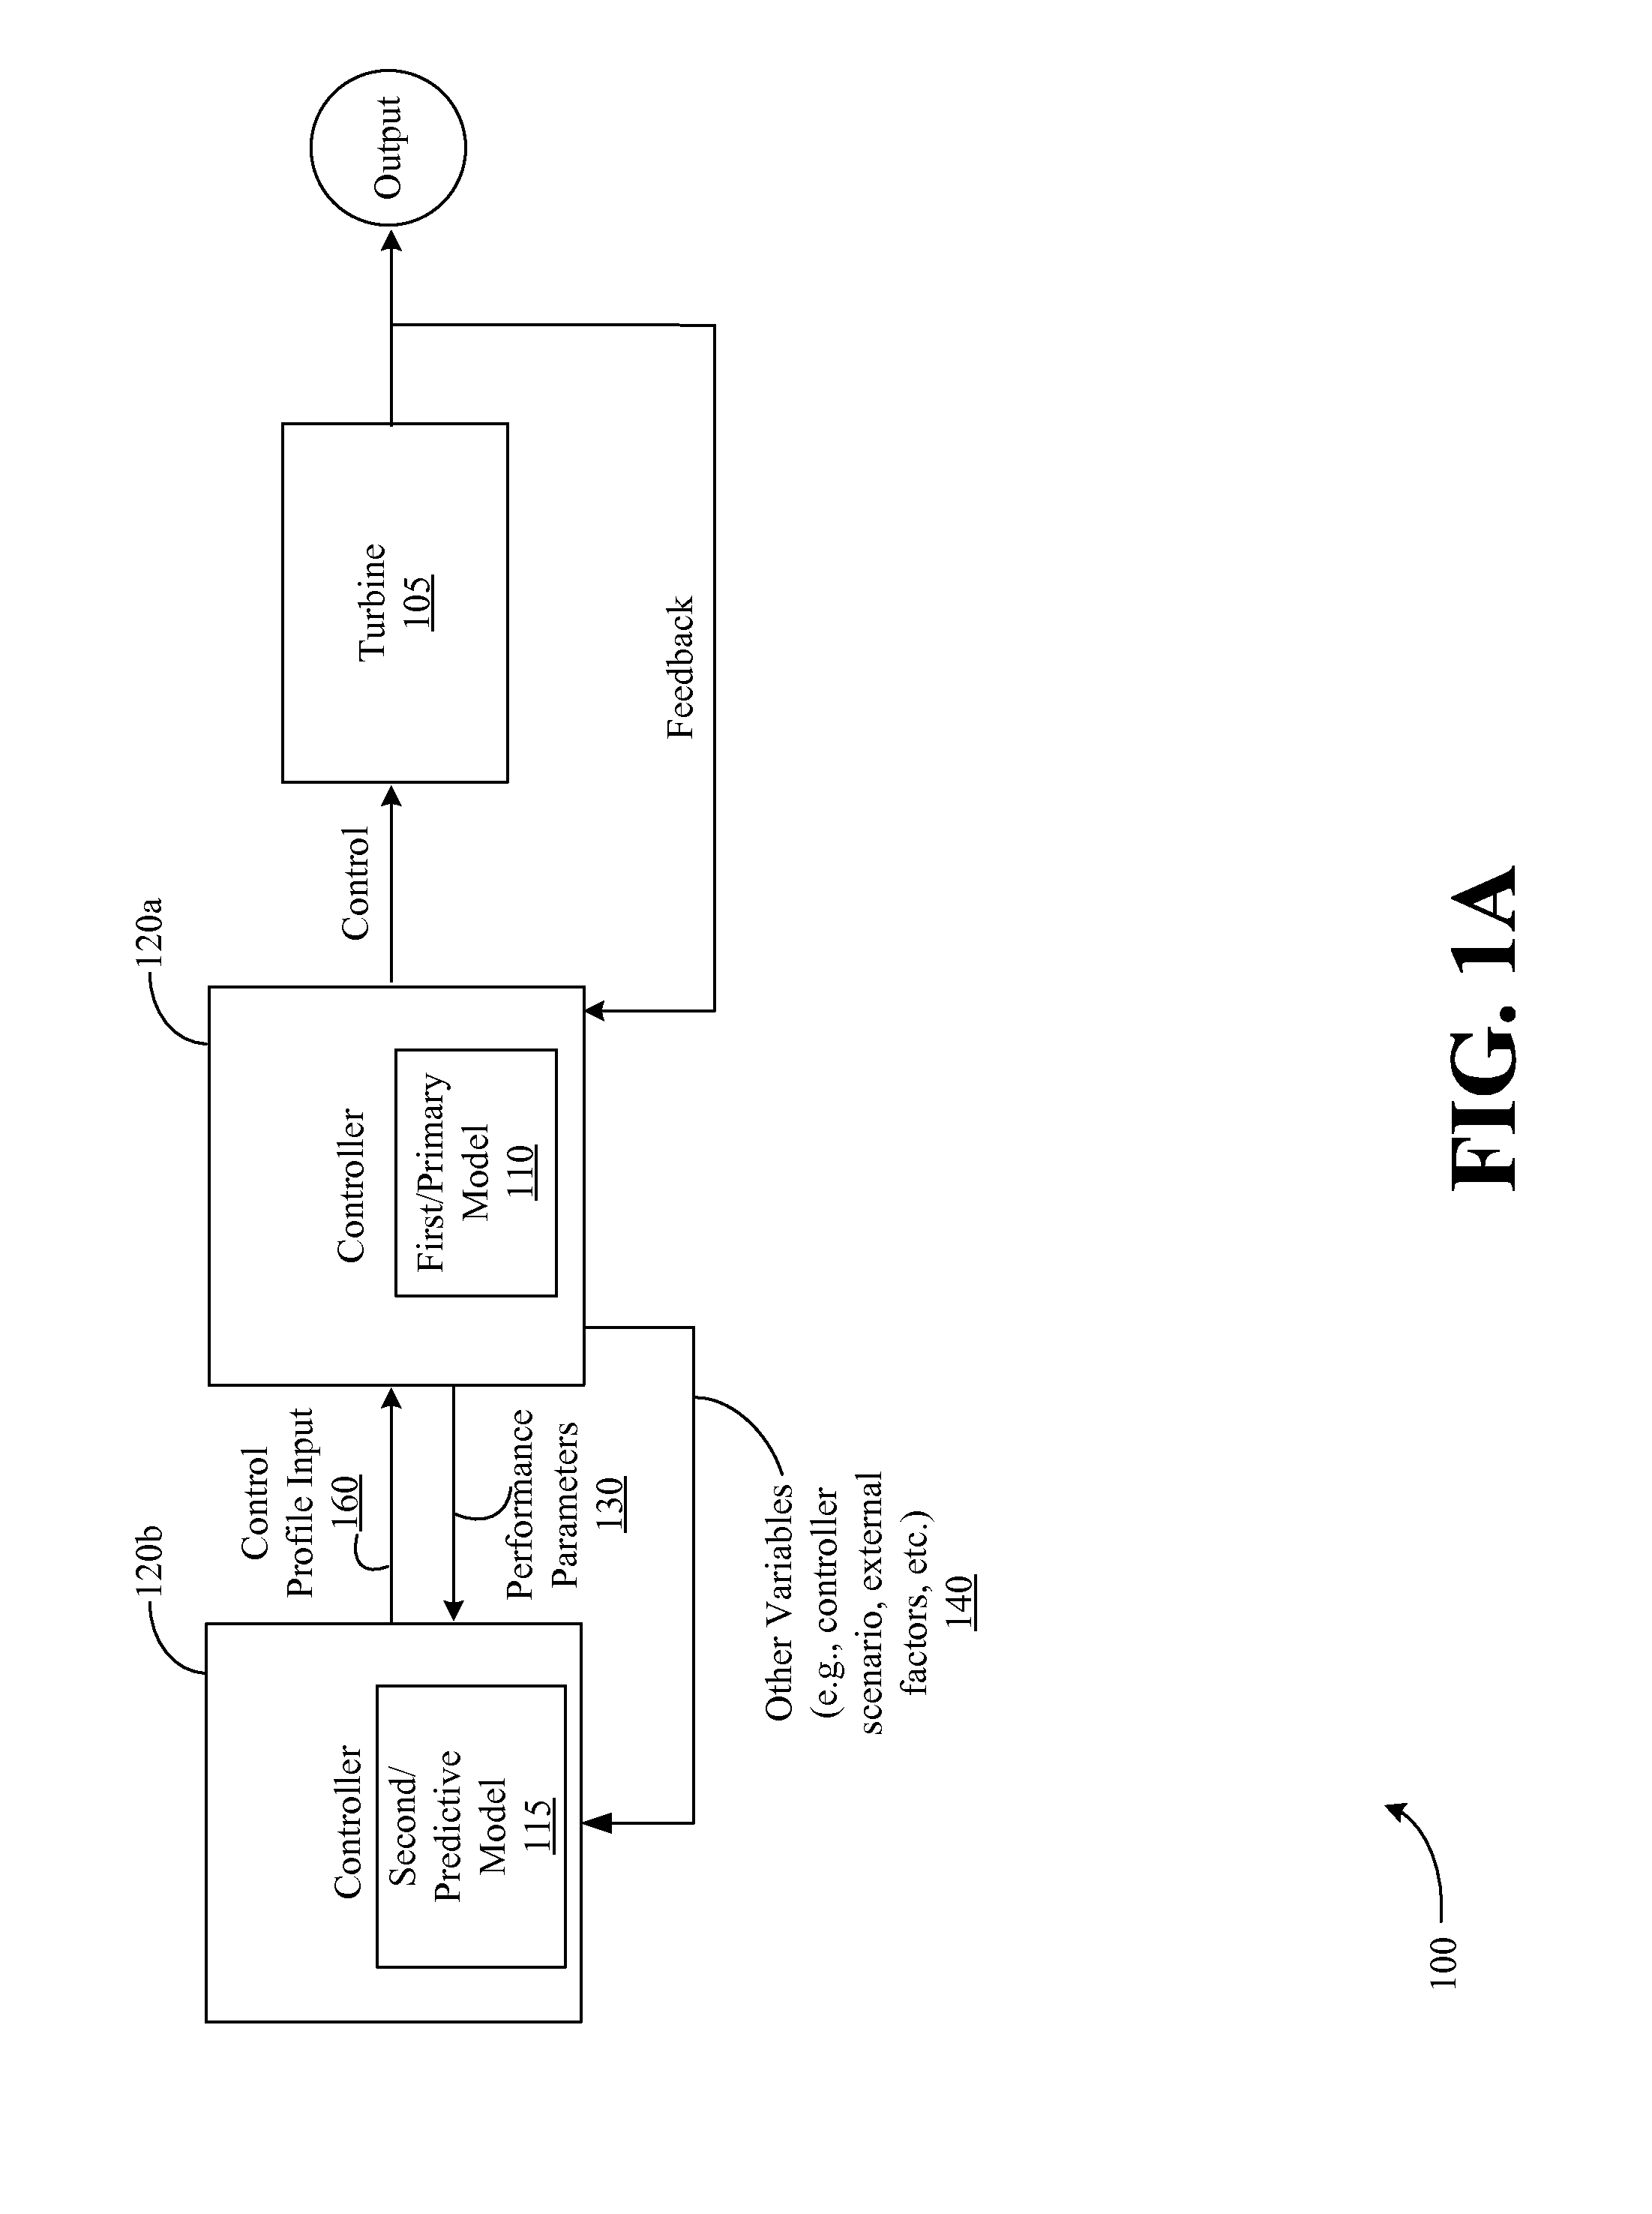 Methods and Systems for Modeling Turbine Operation